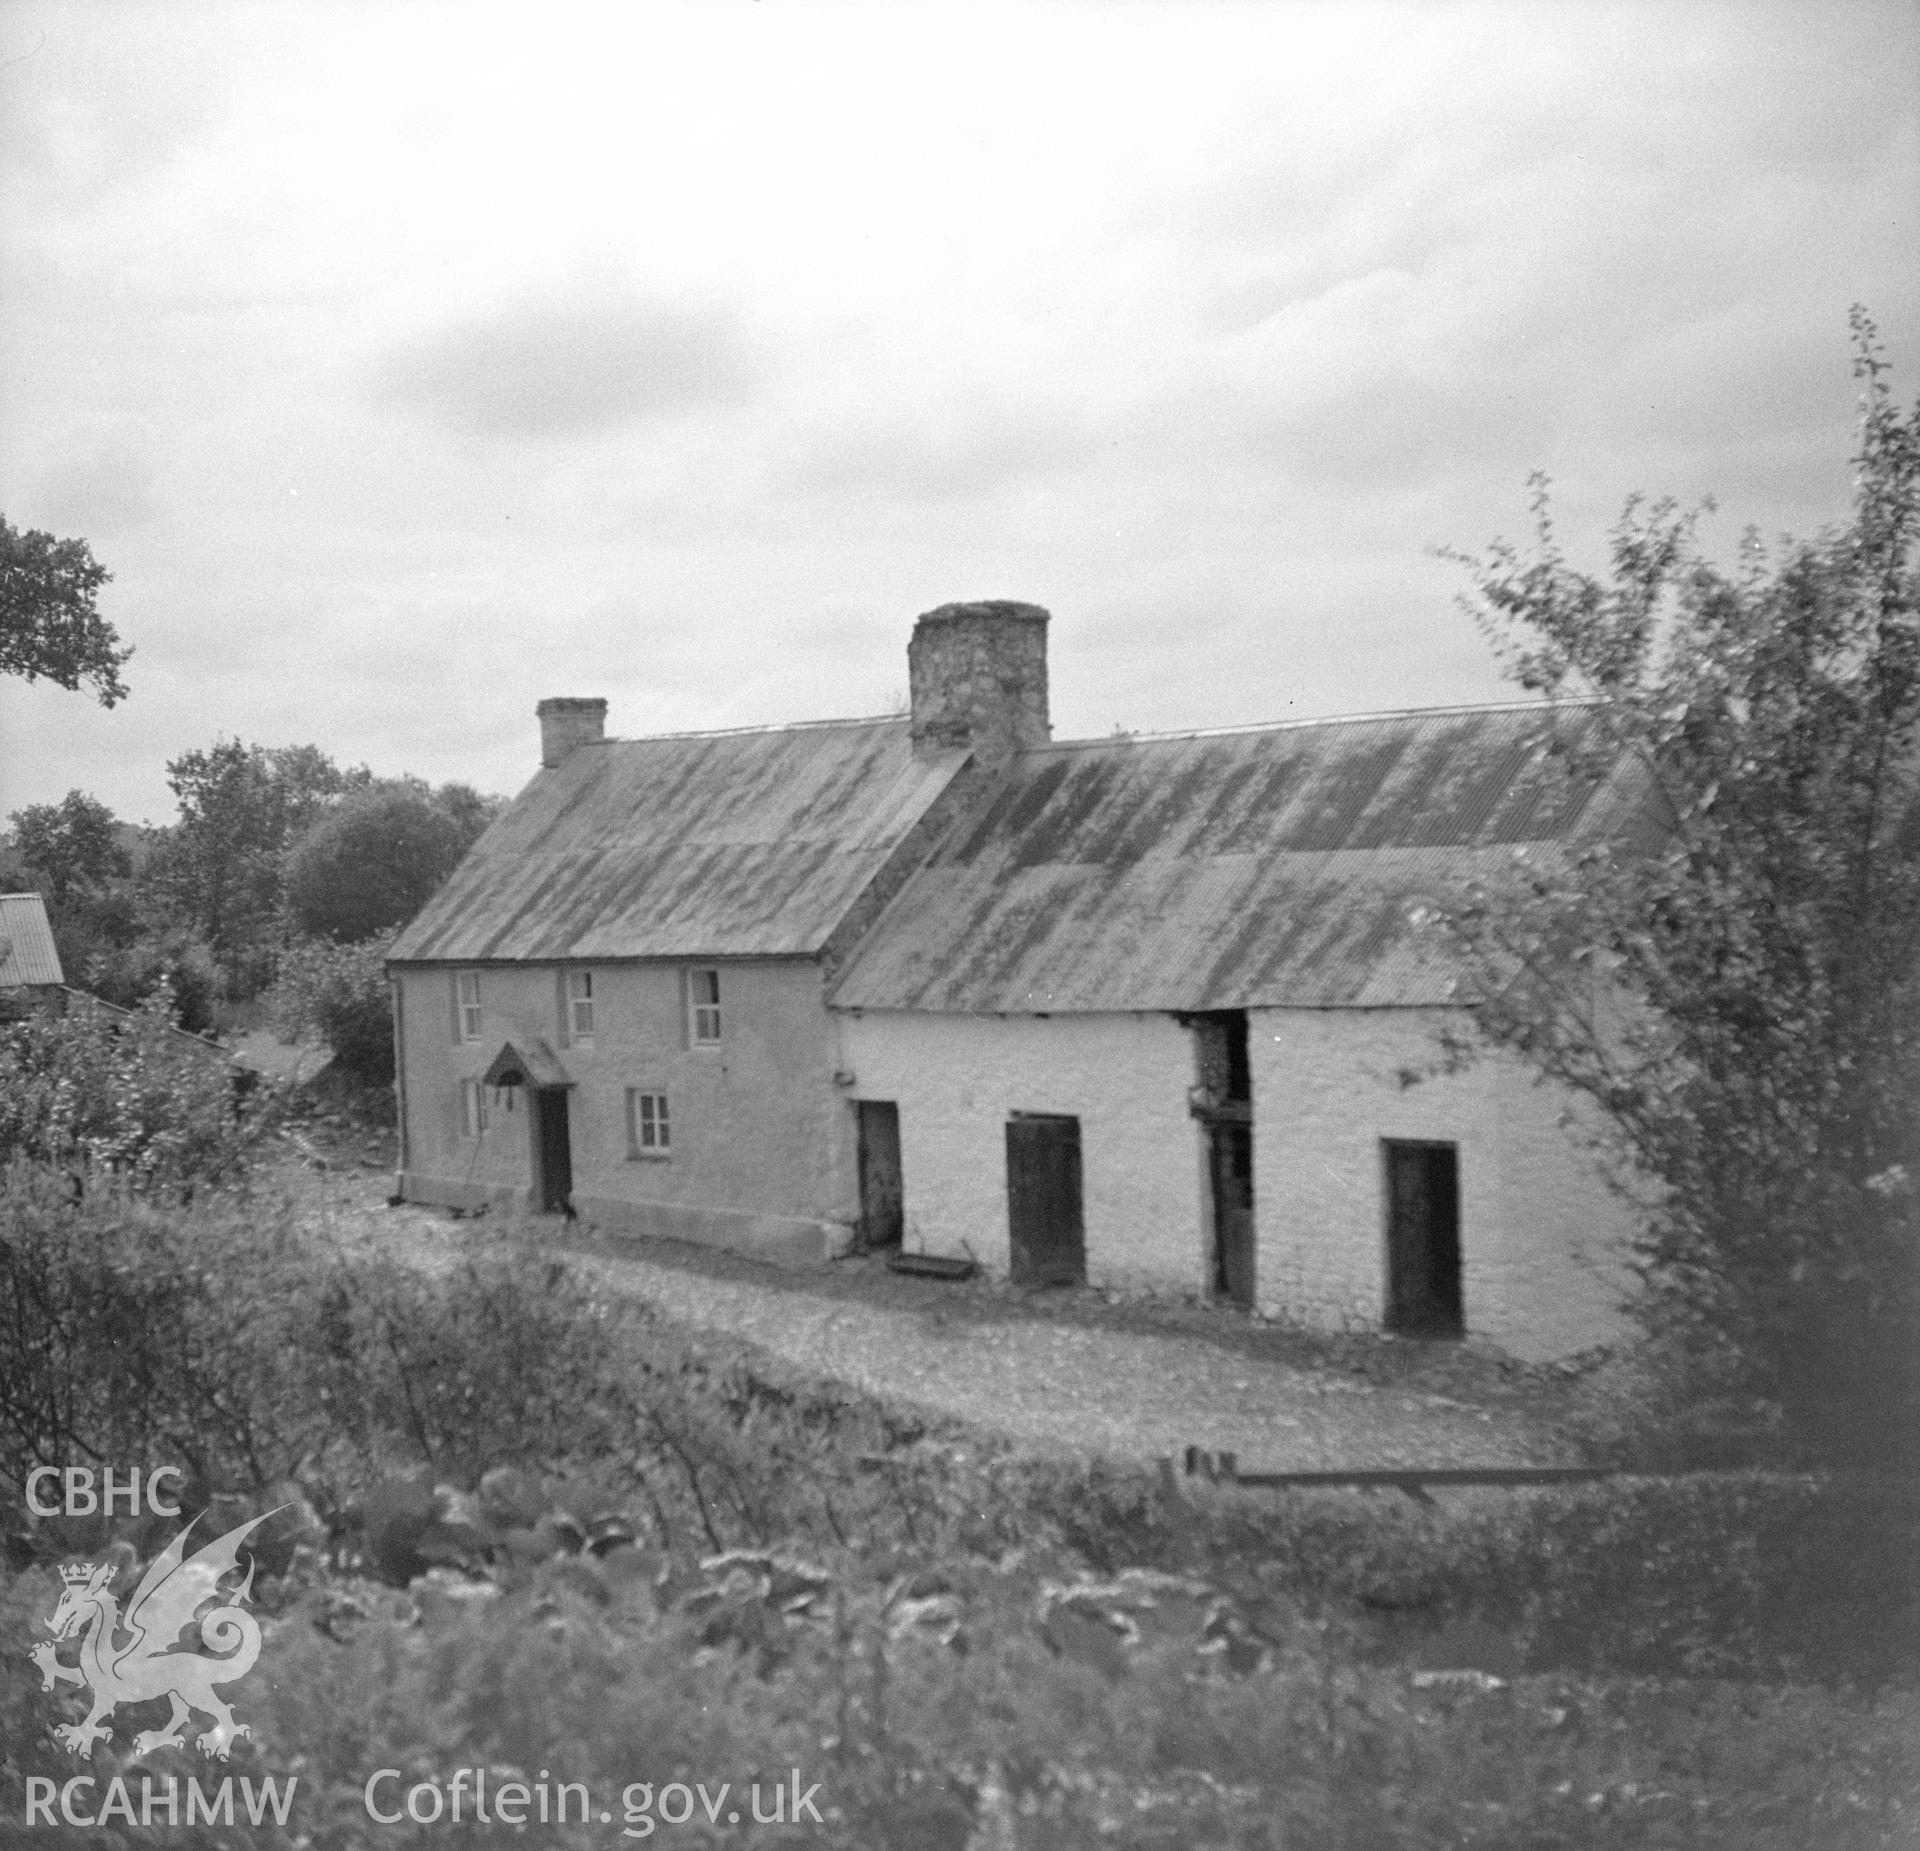 Digital copy of a nitrate negative showing general view of Ty'r Celyn, Llandeilo.